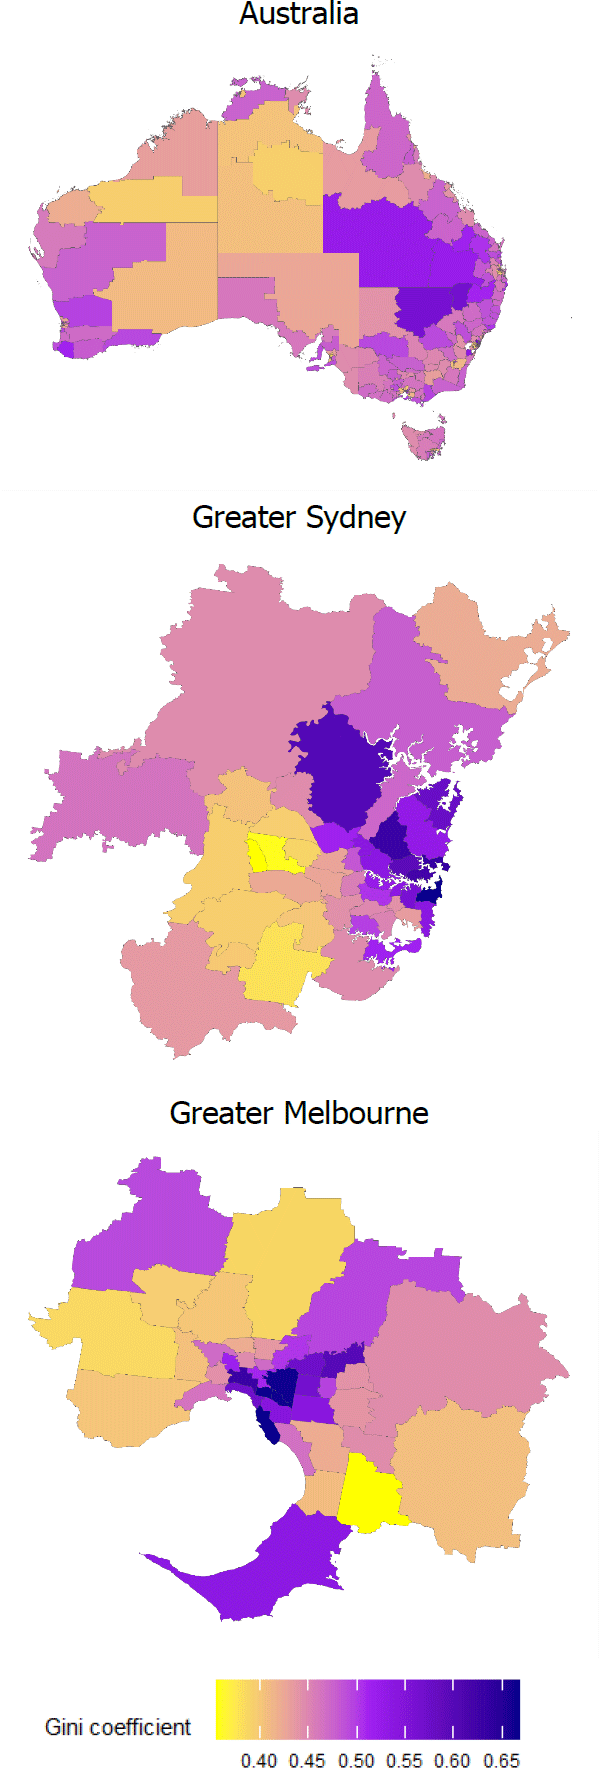 Figure 1: Income Inequality Gini Coefficient map within each Statistical Area 3 for Australia, Greater Sydney and Greater Melbourne in 2018. Details described in discussion paper.